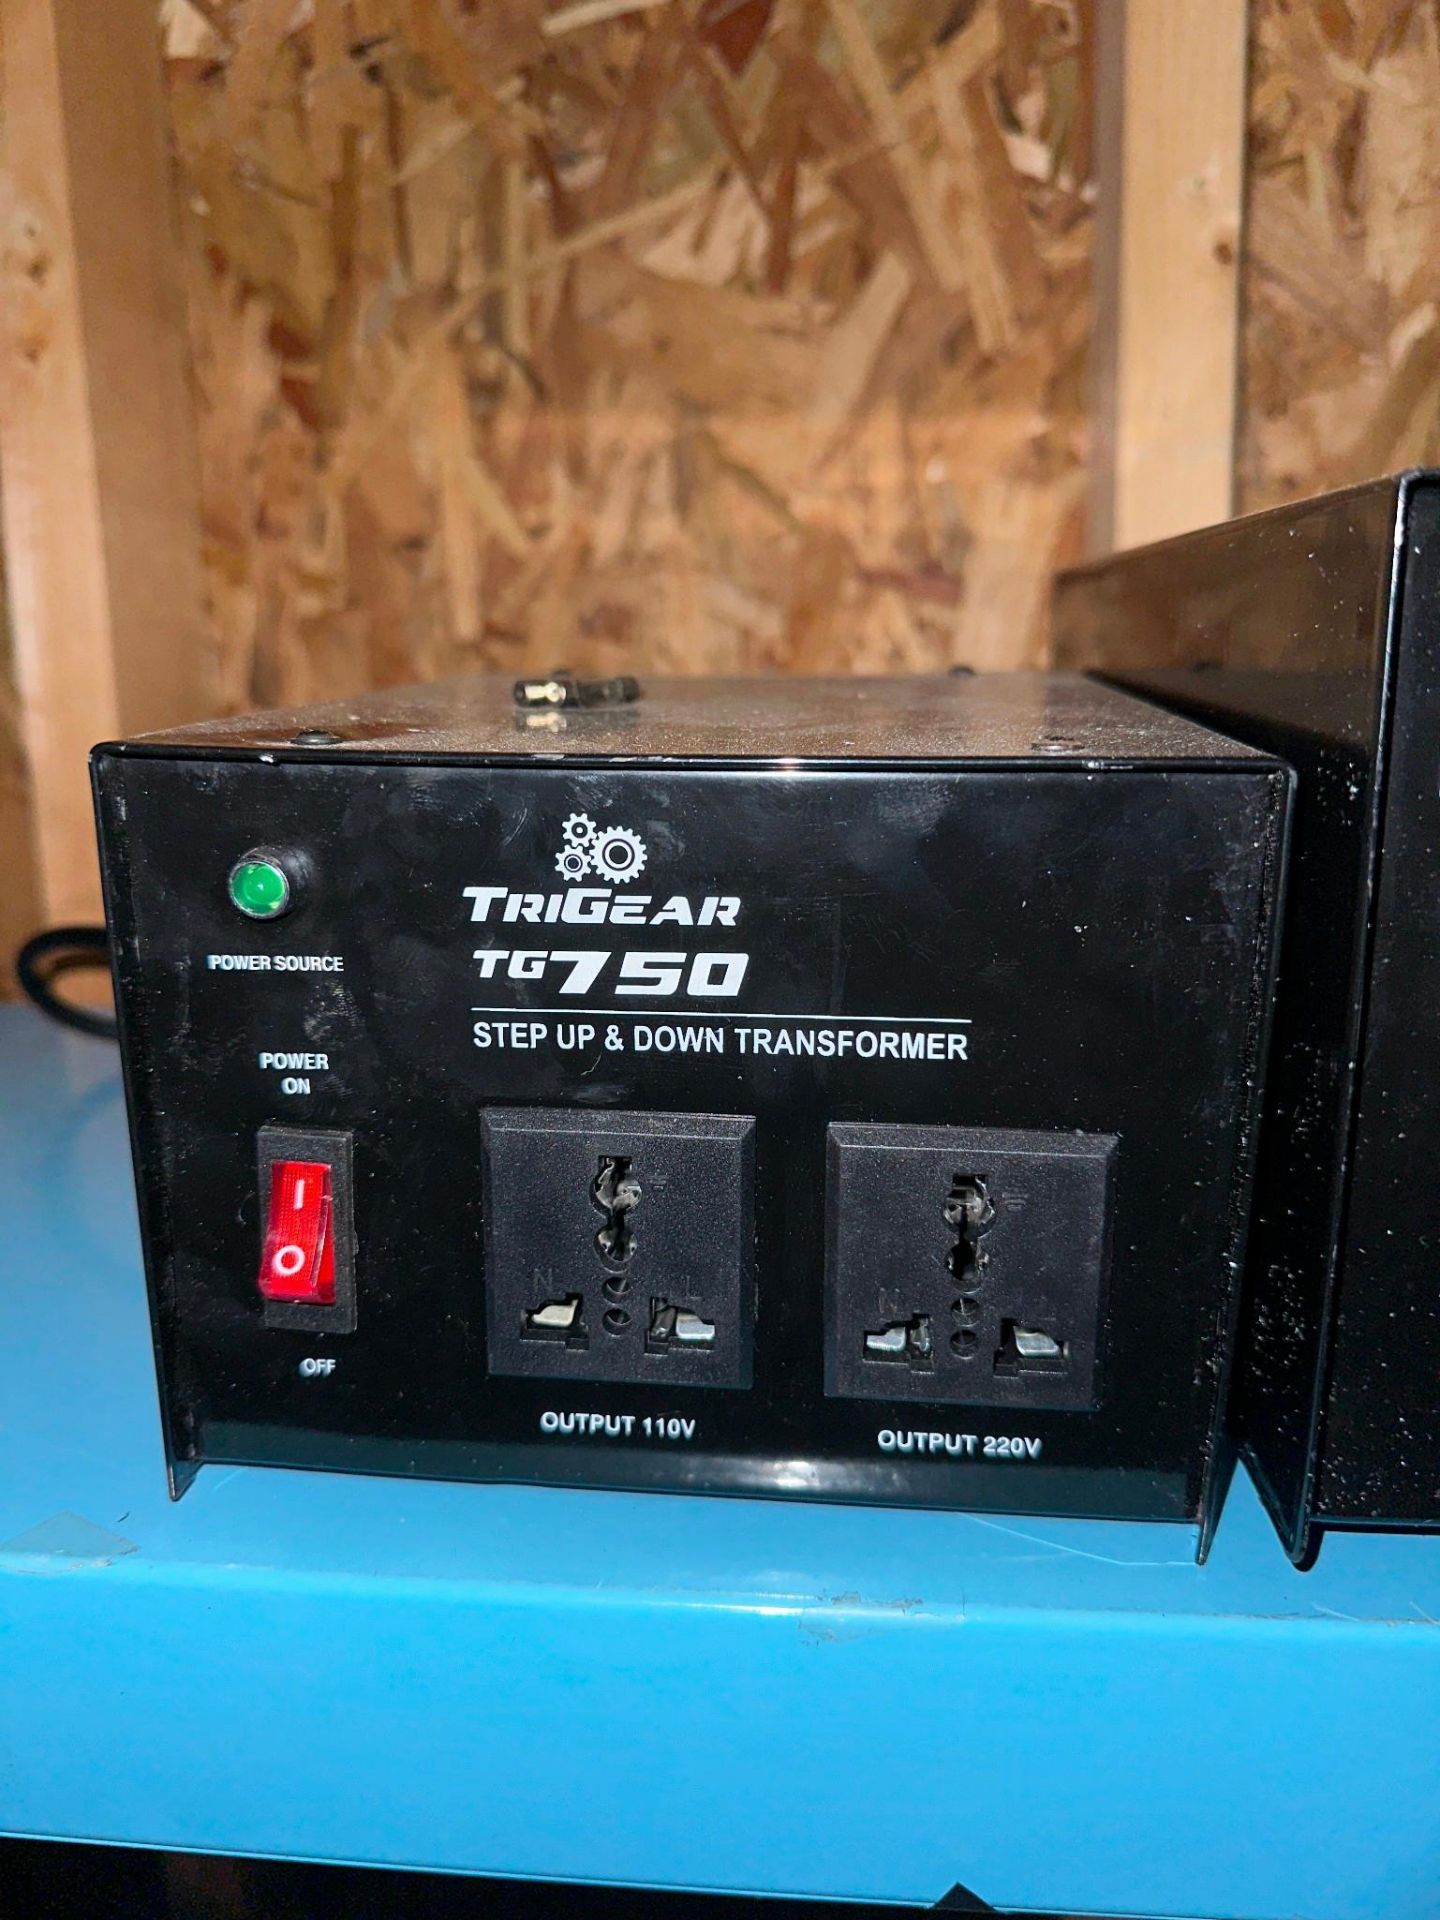 (2) POWERBRIGHT VC-2000W STEP UP & DOWN TRANSFORMER AND (1) TRIGEAR TG750 STEP UP & DOWN TRANSFORMER - Image 2 of 6